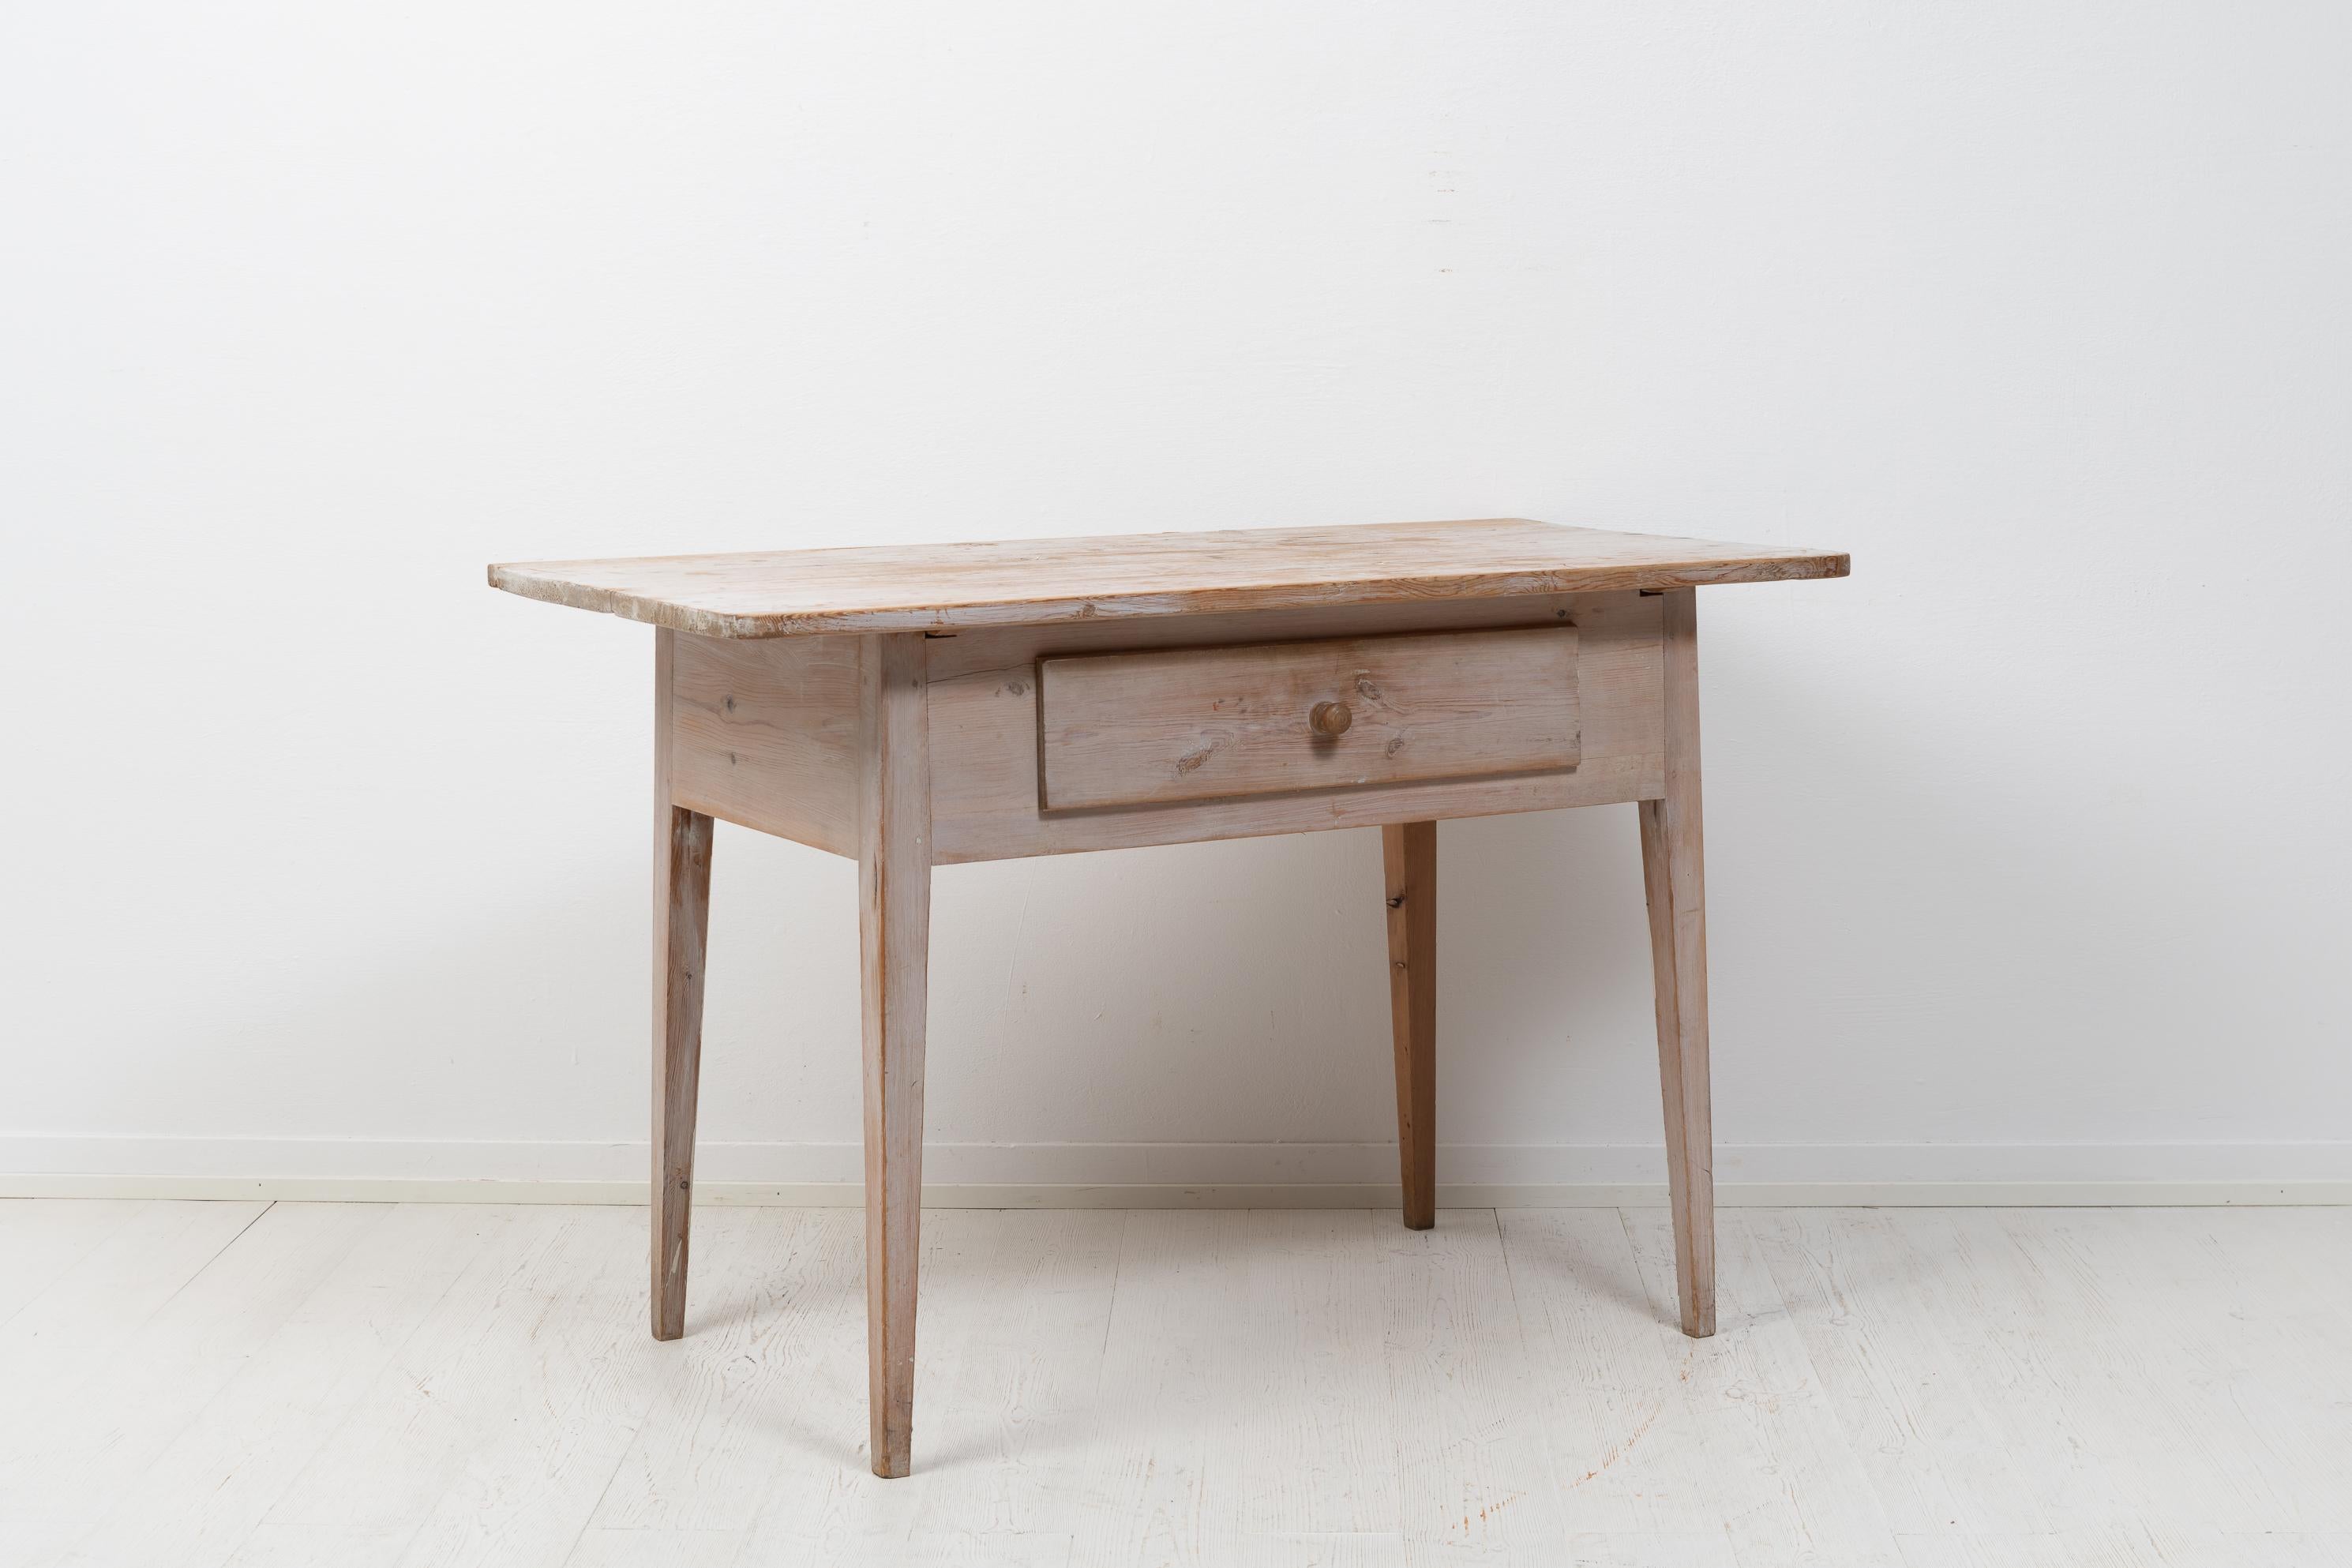 Genuine Antique Swedish Handmade Folk Art Pine Rustic Table with Drawer In Good Condition For Sale In Kramfors, SE